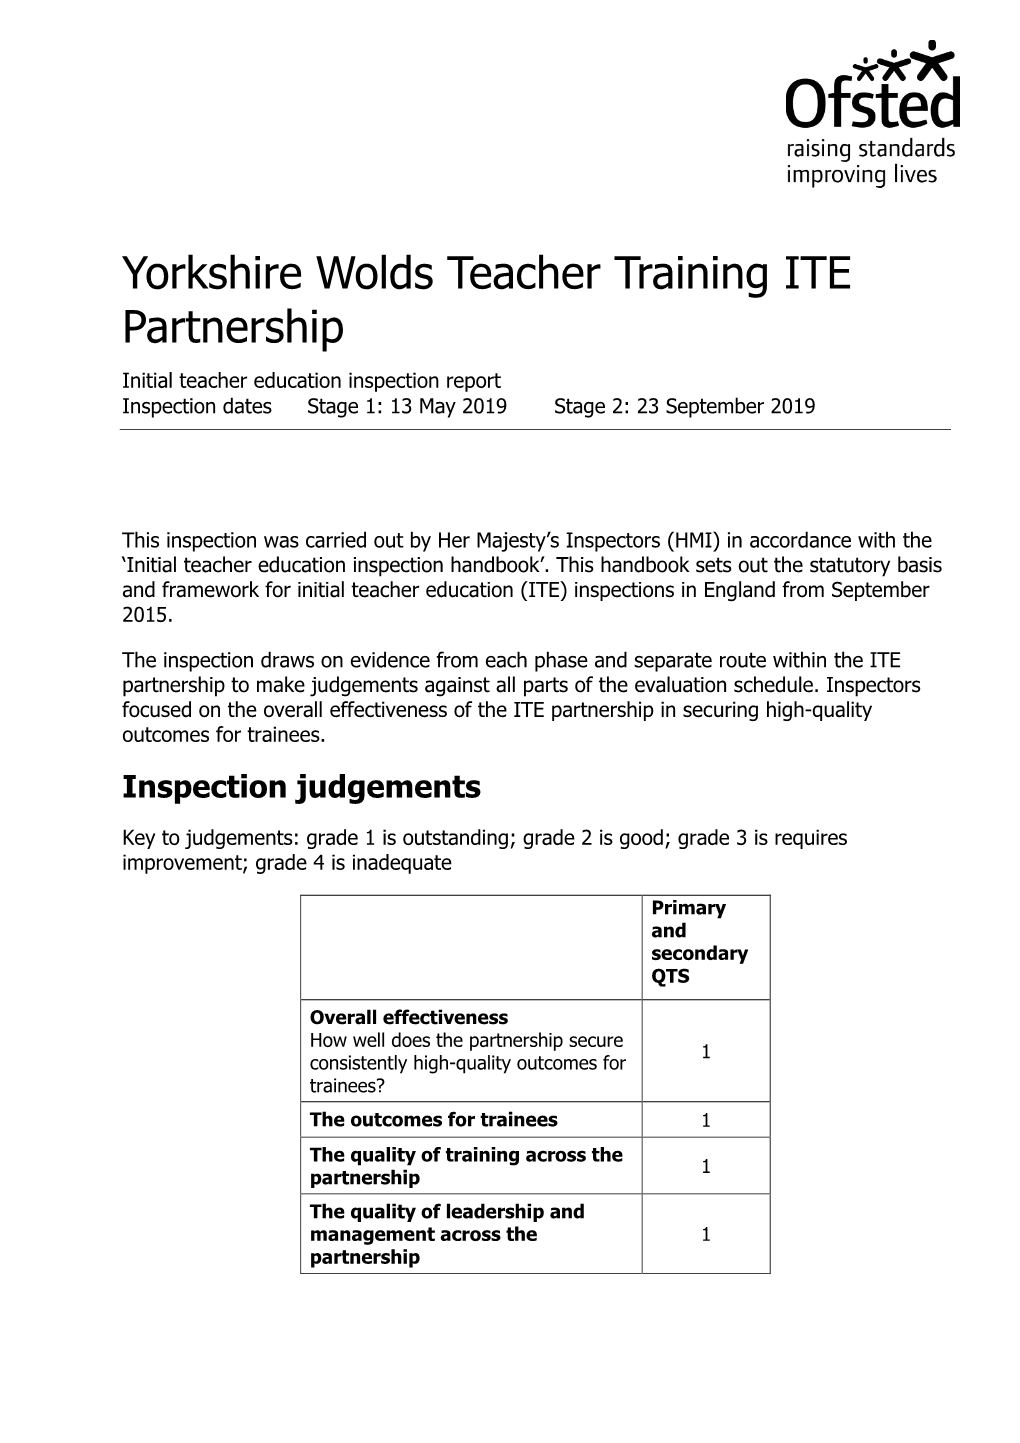 Yorkshire Wolds Teacher Training ITE Partnership Initial Teacher Education Inspection Report Inspection Dates Stage 1: 13 May 2019 Stage 2: 23 September 2019